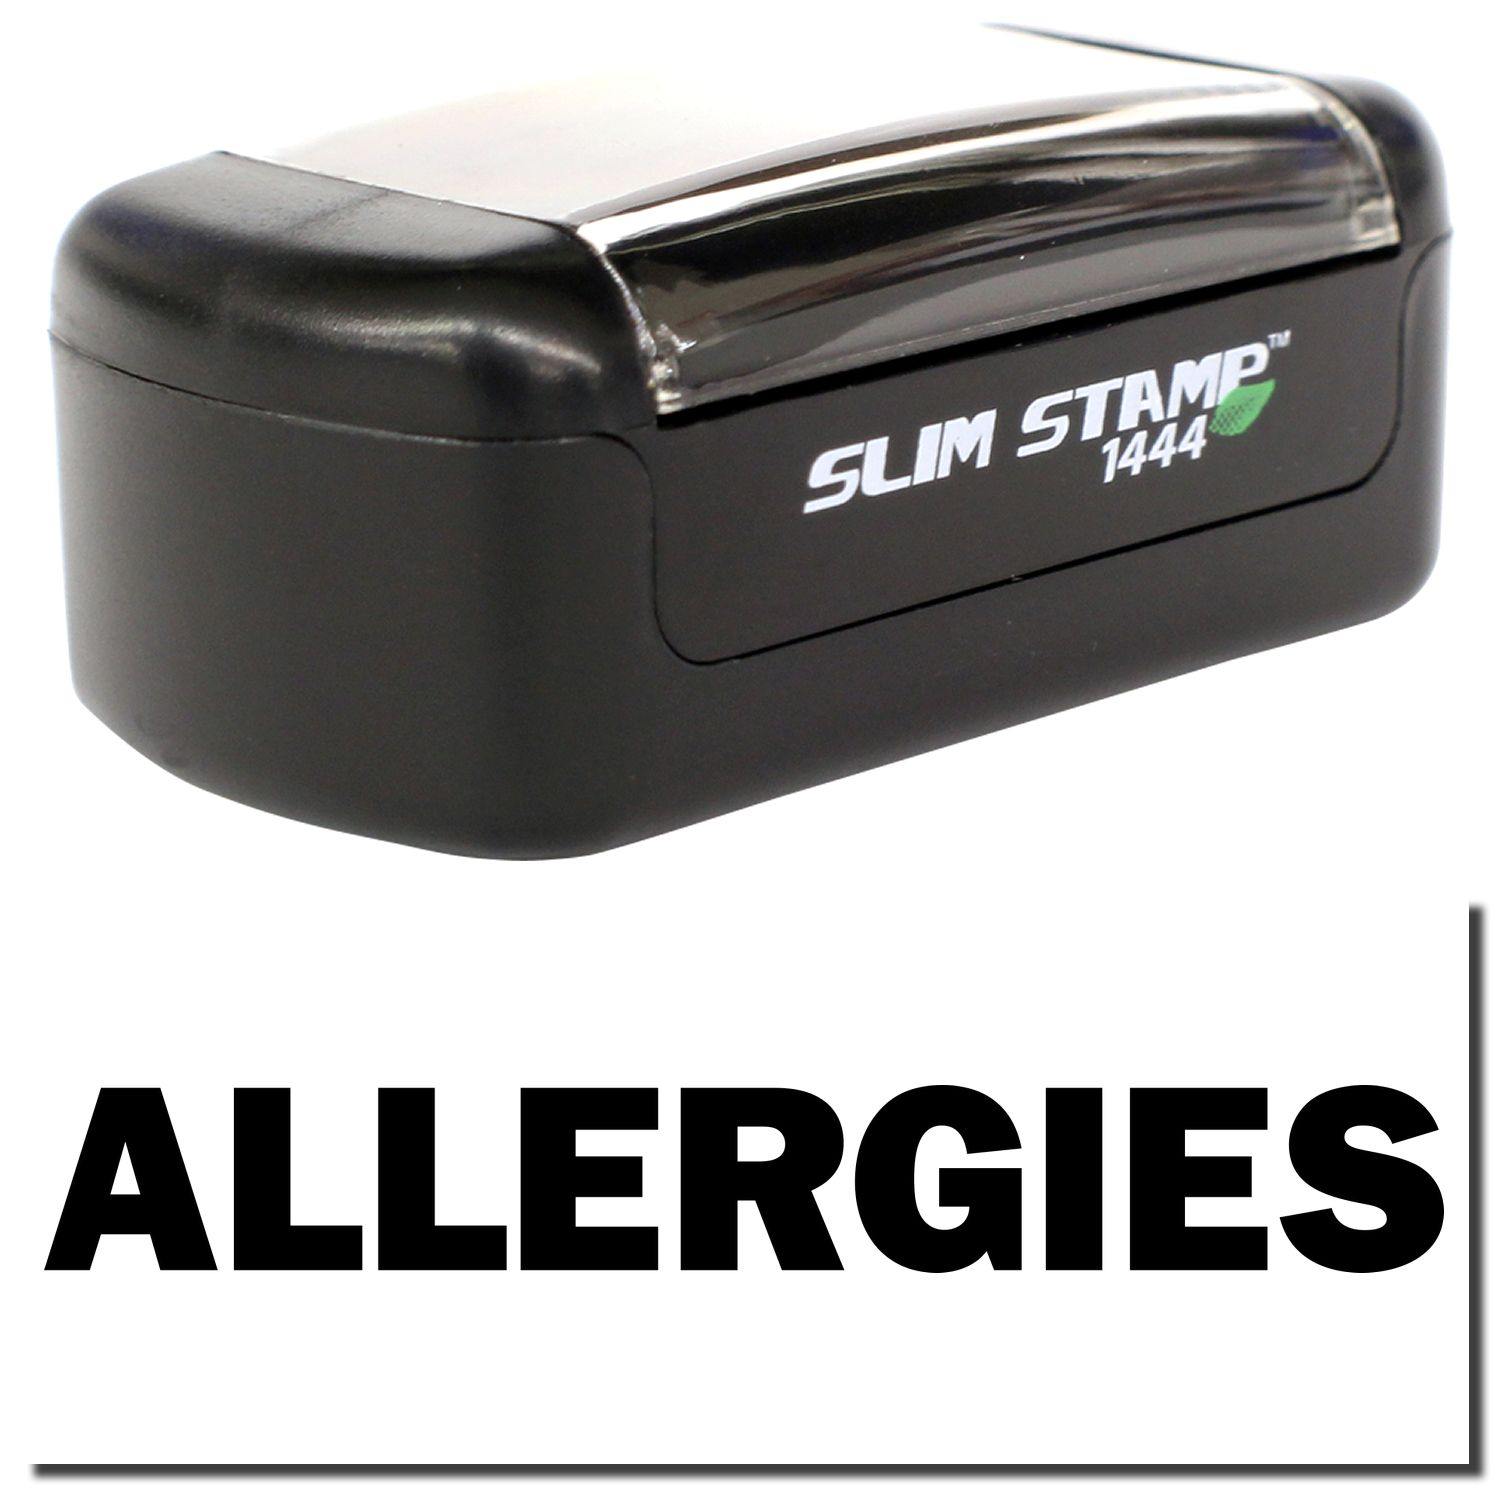 A stock office pre-inked stamp with a stamped image showing how the text "ALLERGIES" is displayed after stamping.